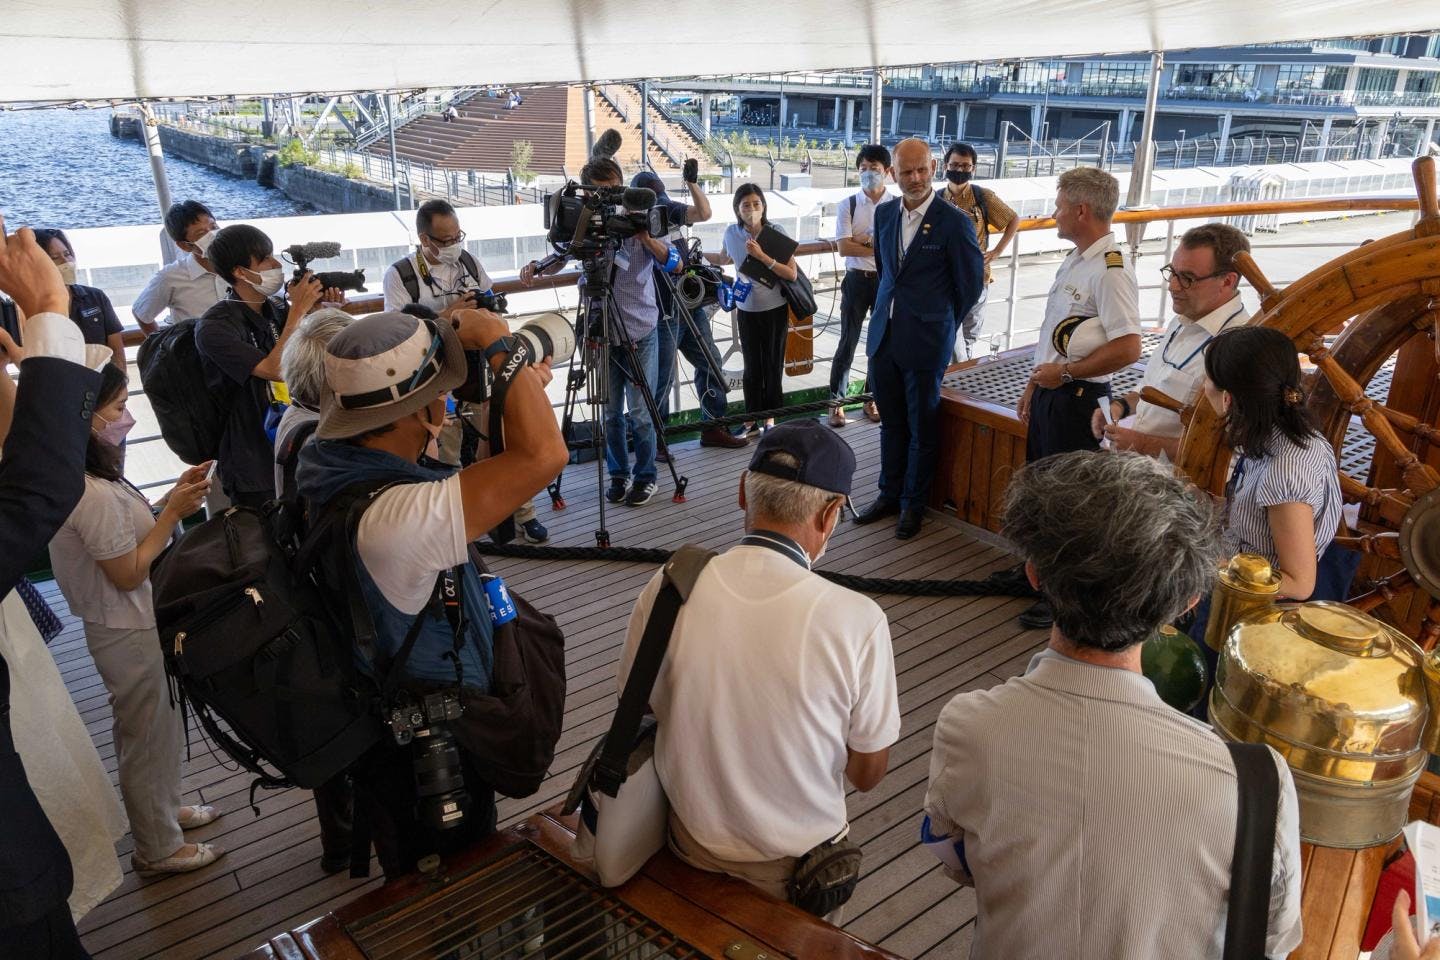 Big interest from Japanese media in Yokohama: Director Haakon Vatle and captain Sune Blinkenberg answer questions from the press about the ship and the circumnavigation.  Photo: André Marton Pedersen